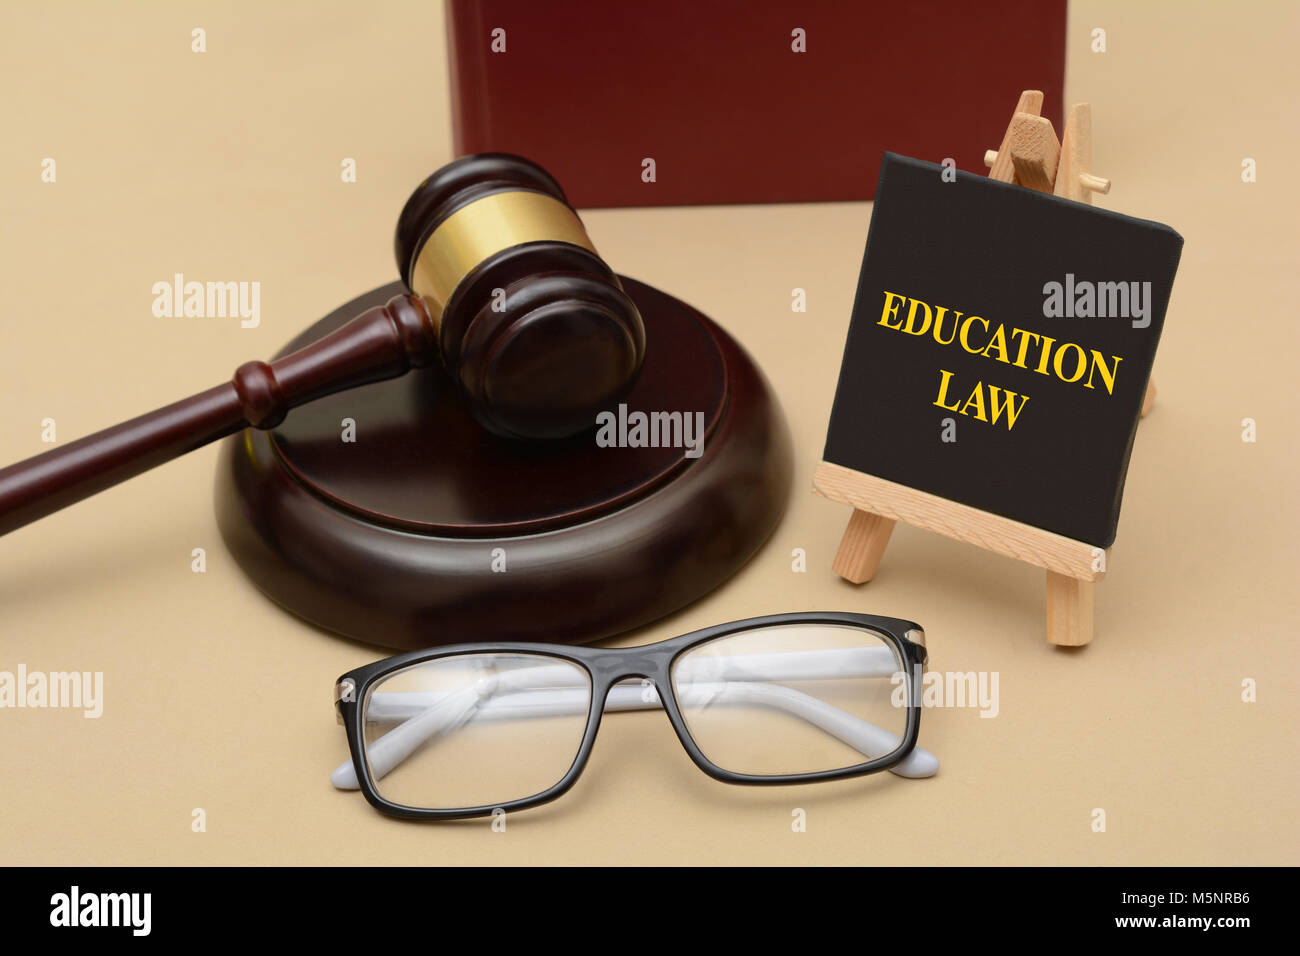 Education Law sign with wood gavel and glasses Stock Photo